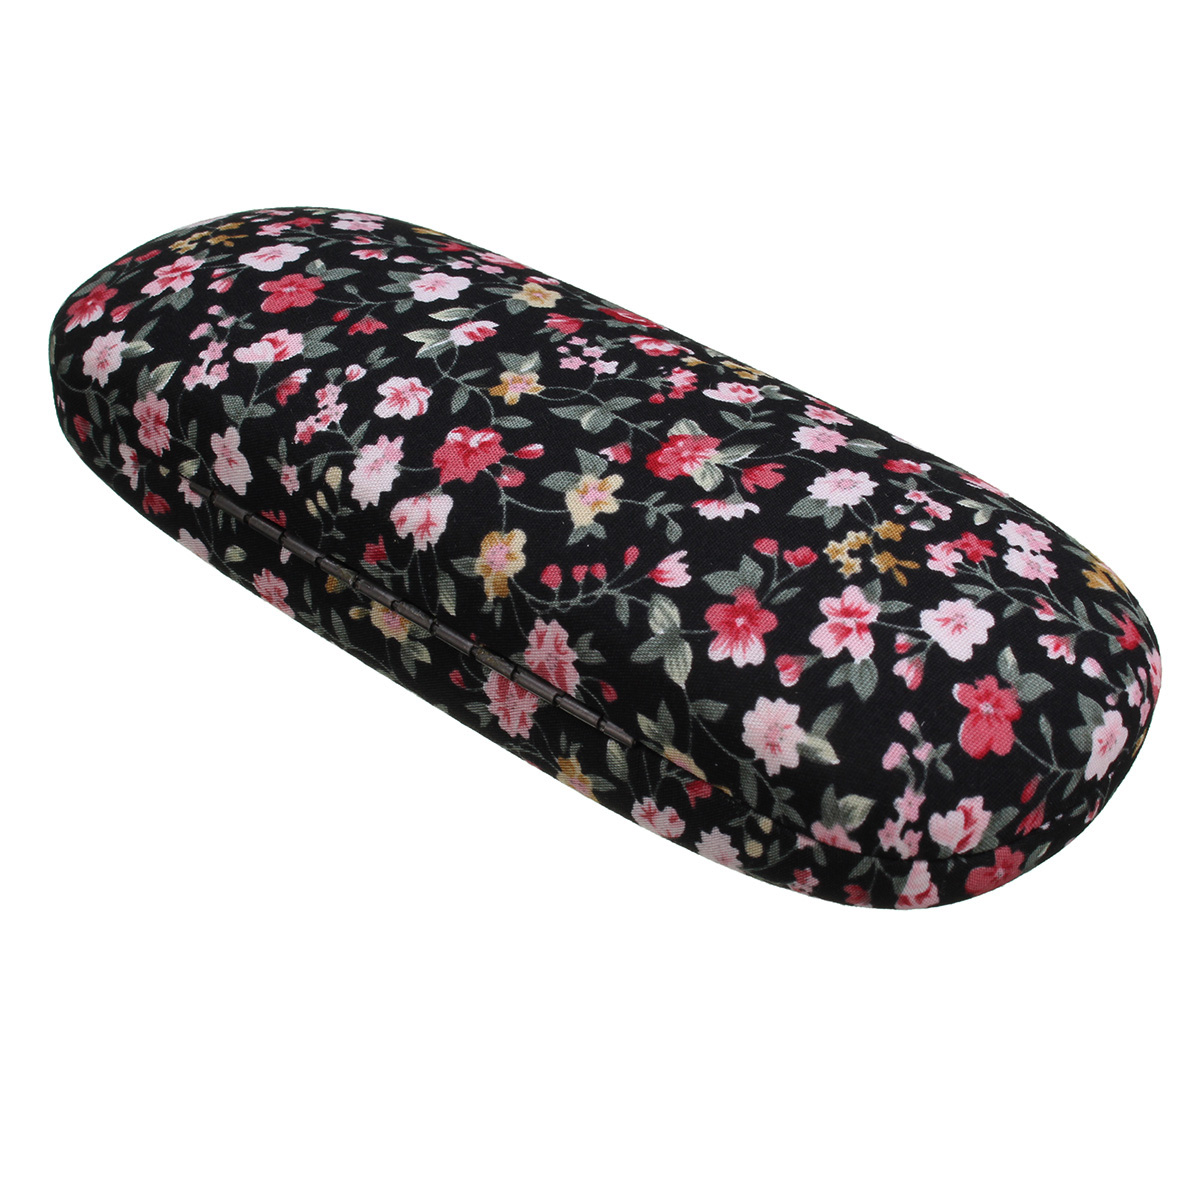 Hard-Sunglass-Glasses-Box-Floral-Reading-Glasses-Storage-Spectacle-Glasses-Case-1028006